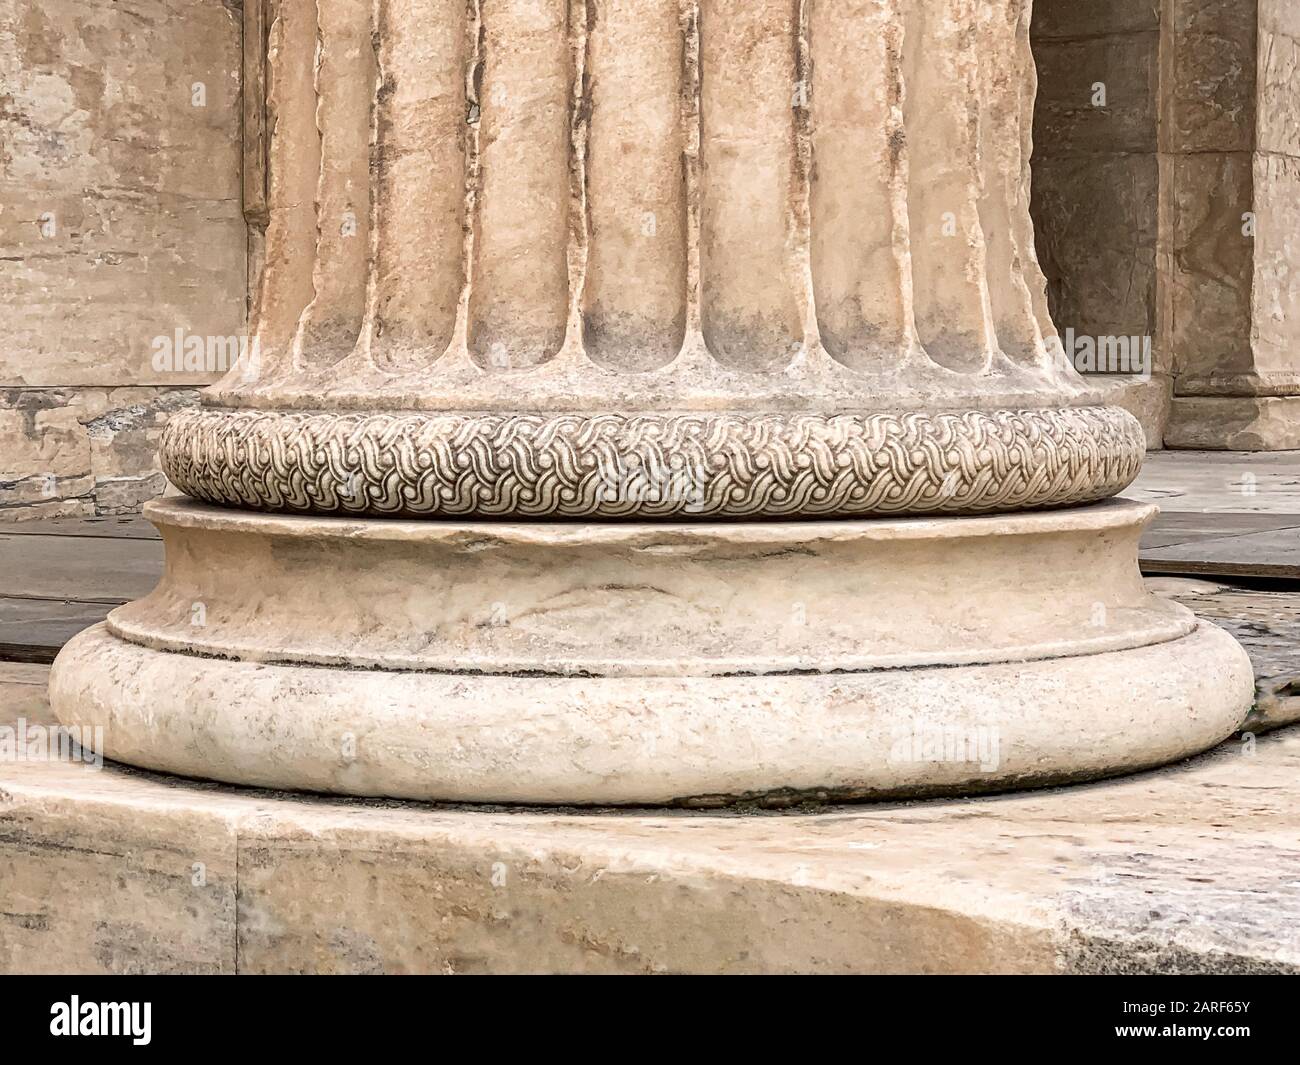 Base of a Greek stone column at the Parthenon of Acropolis in Athens, Greece. Detail of a temple pillar with a decorative ornament. Stock Photo